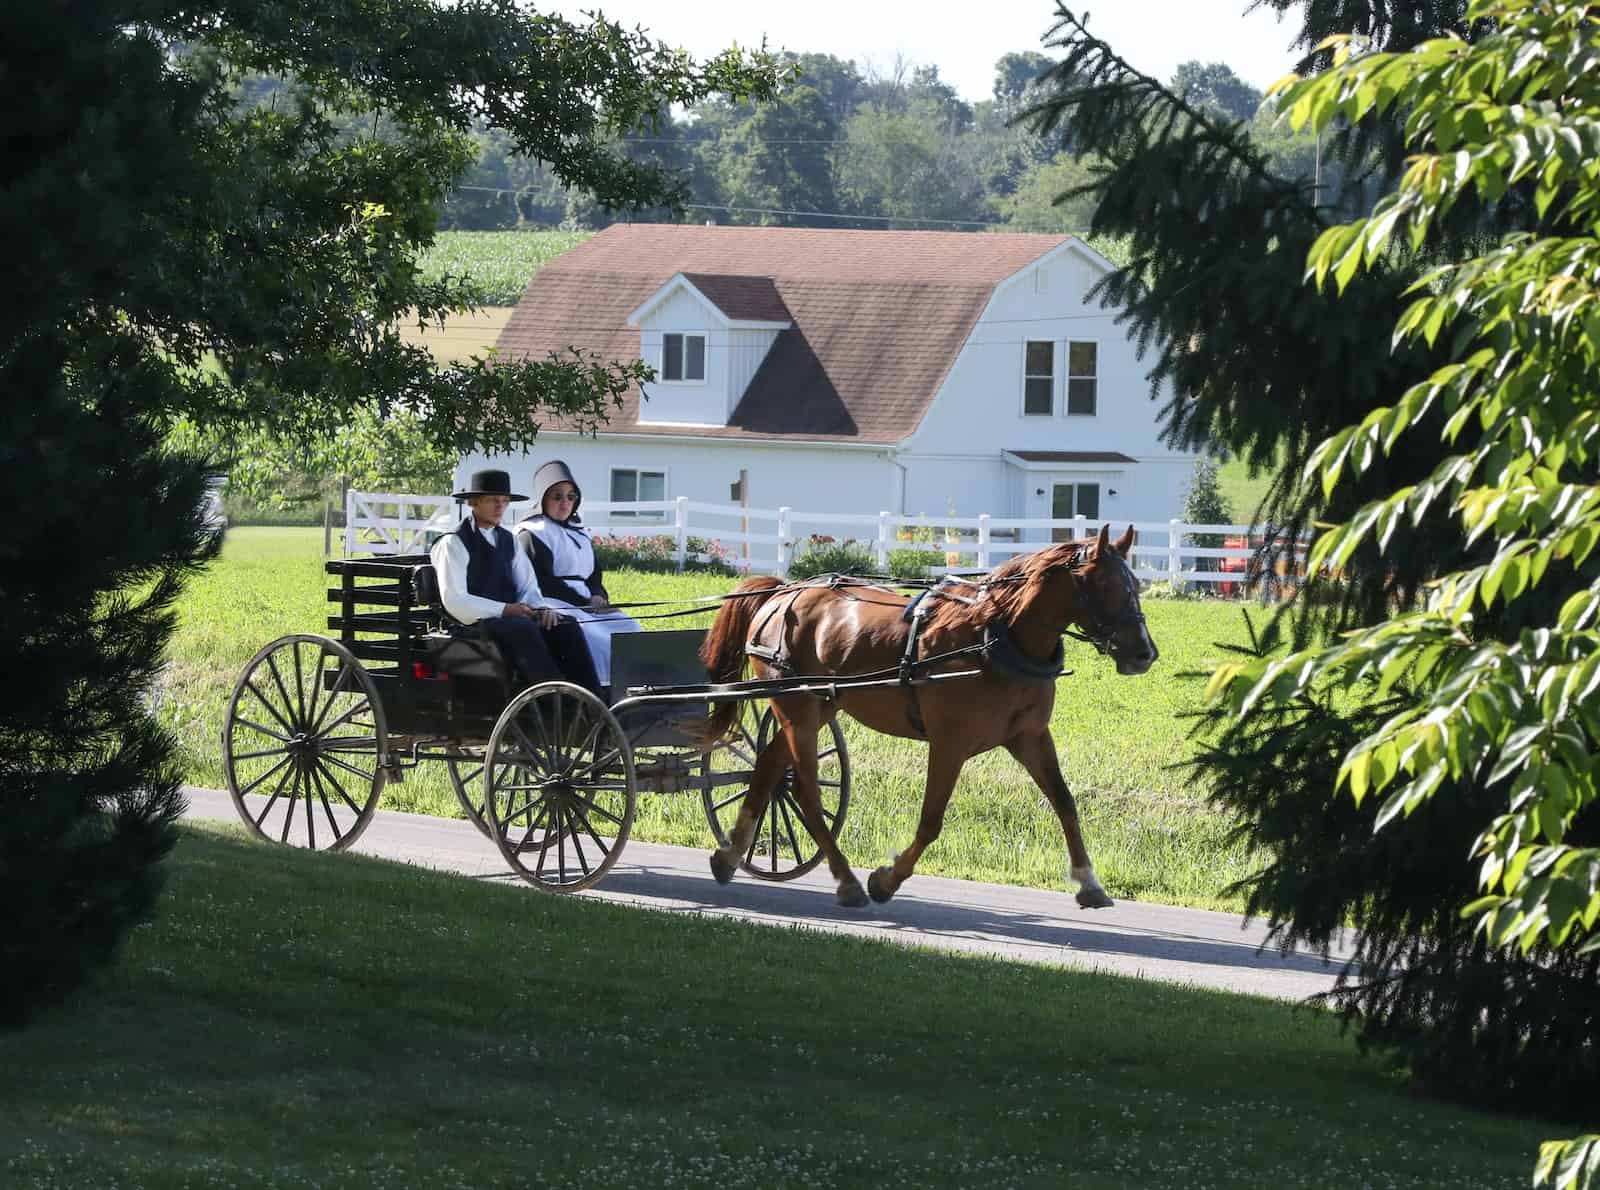 amish man and woman riding horse carriage in the country